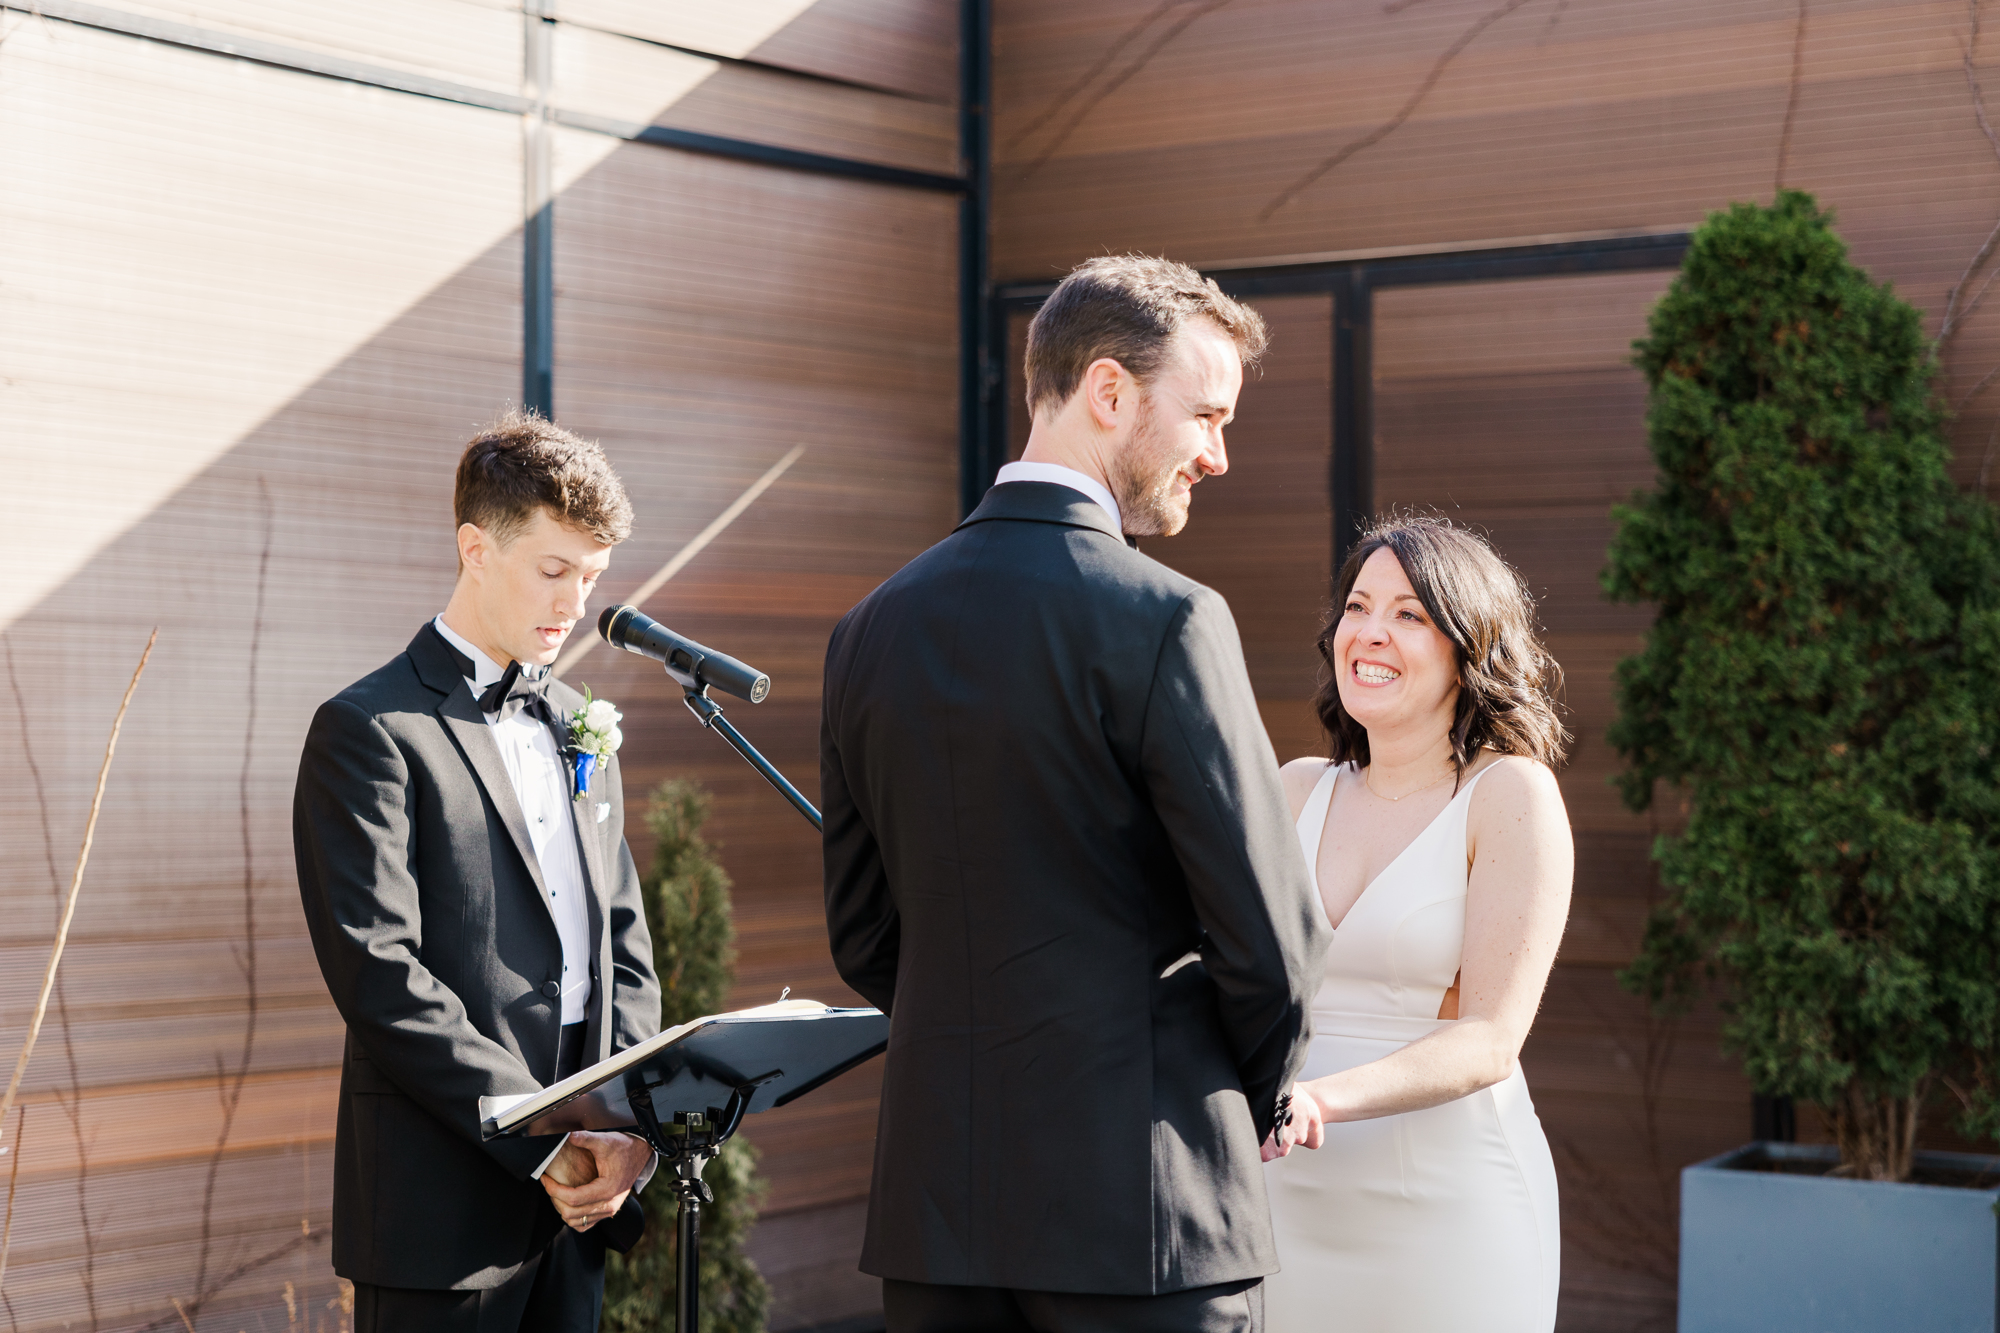 Magical Spring Wedding Photos at The Green Building in Brooklyn NY